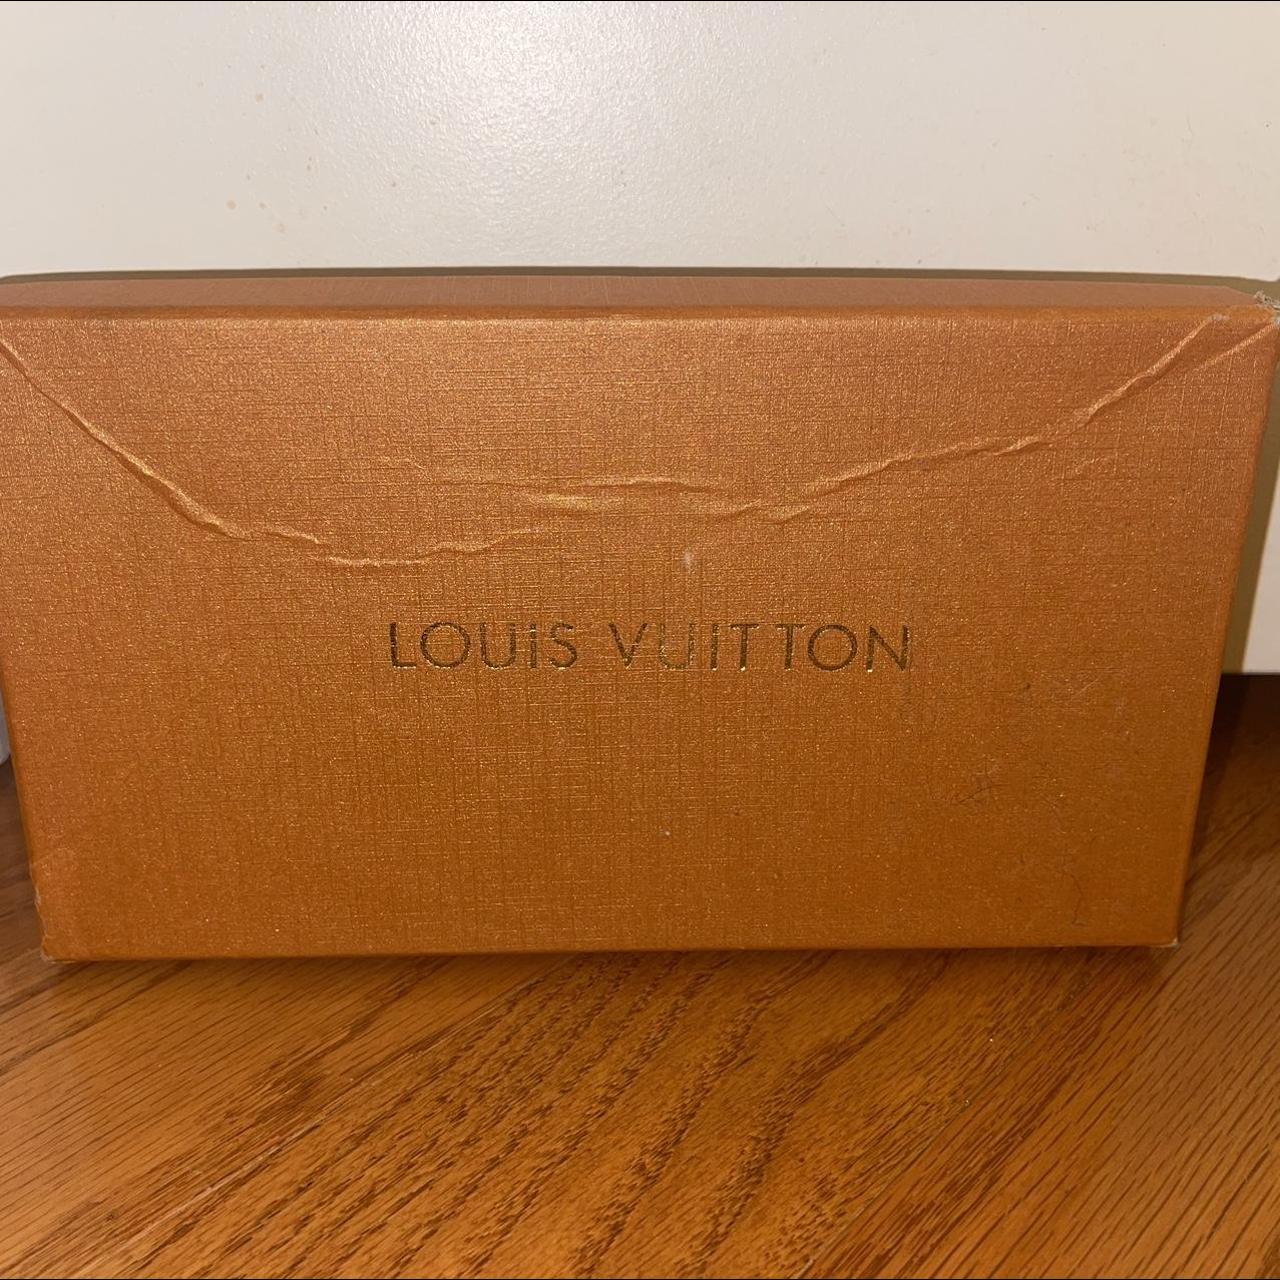 Where can I sell a real Louis Vuitton purse? I only used it 2 times and  have no need for it. - Quora